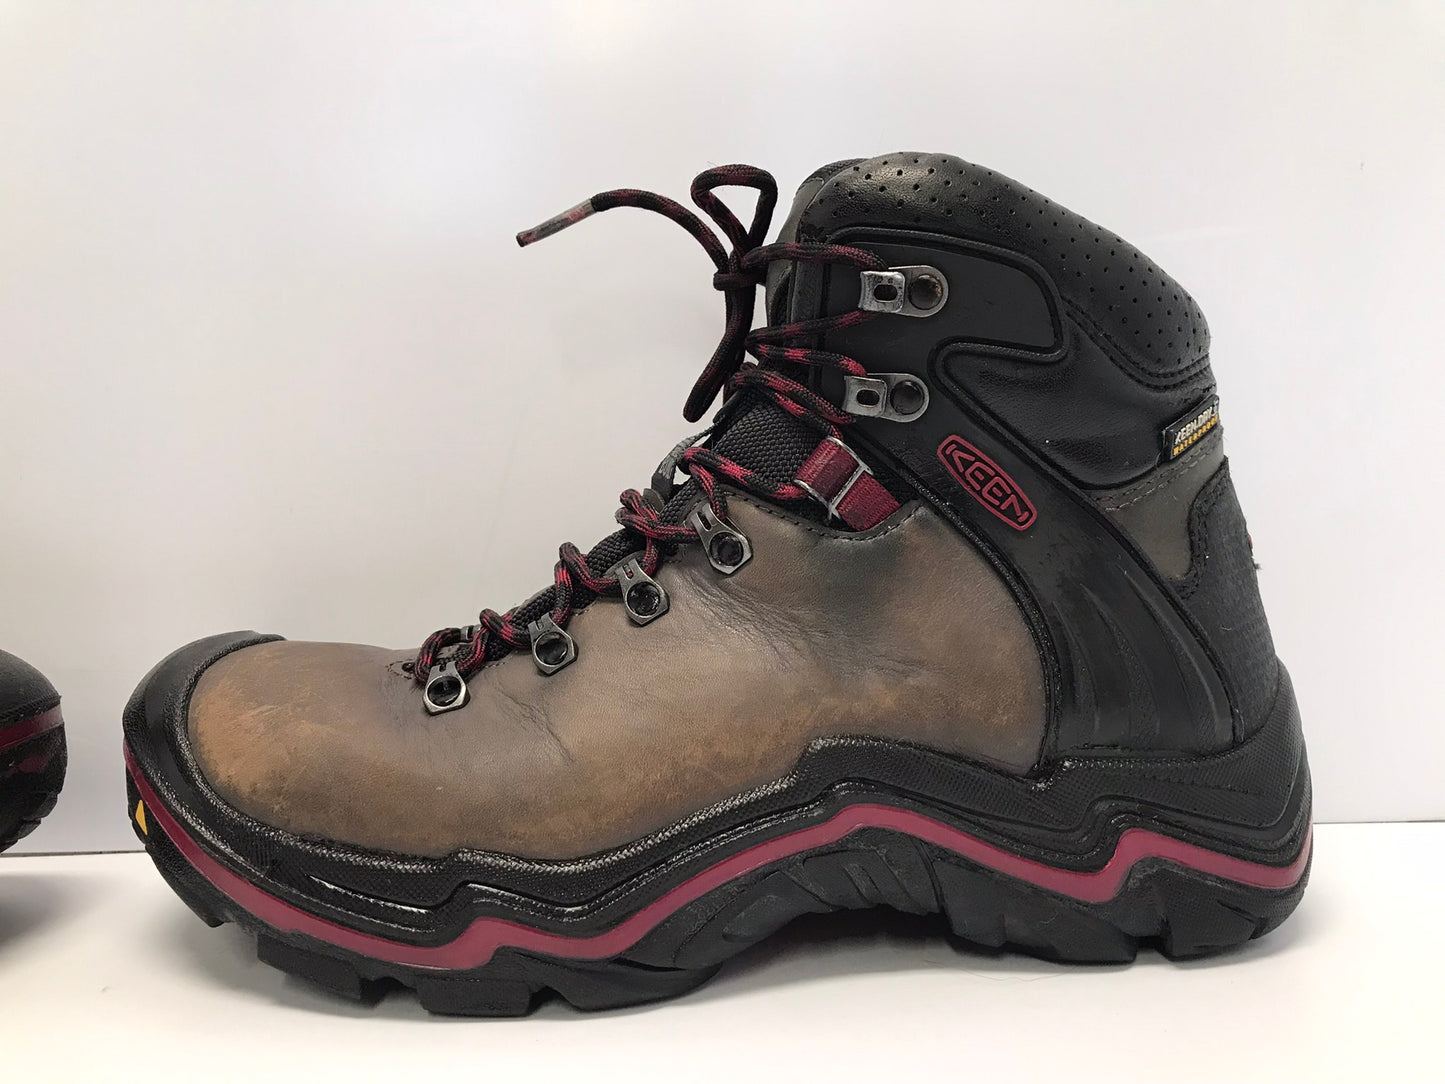 Hiking Boots Ladies Size 8 Keen Dry American Built Waterproof Leather Worn Twice Outstanding Quality